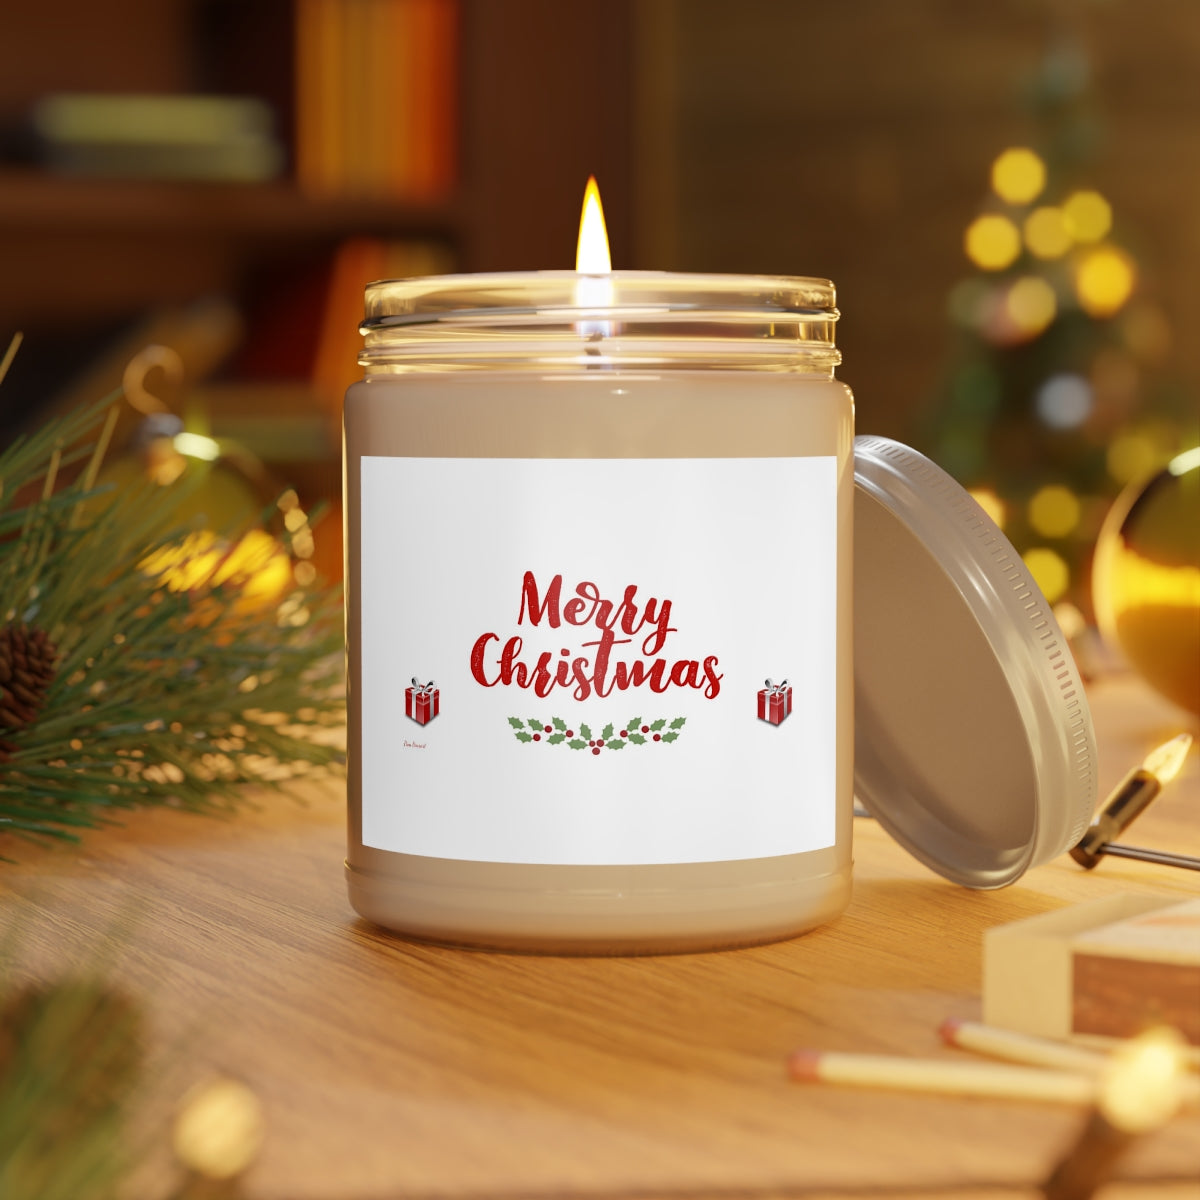 Christmas Candle Gift: Scented; 9 oz. Jar; Soy; 50-60 Hours